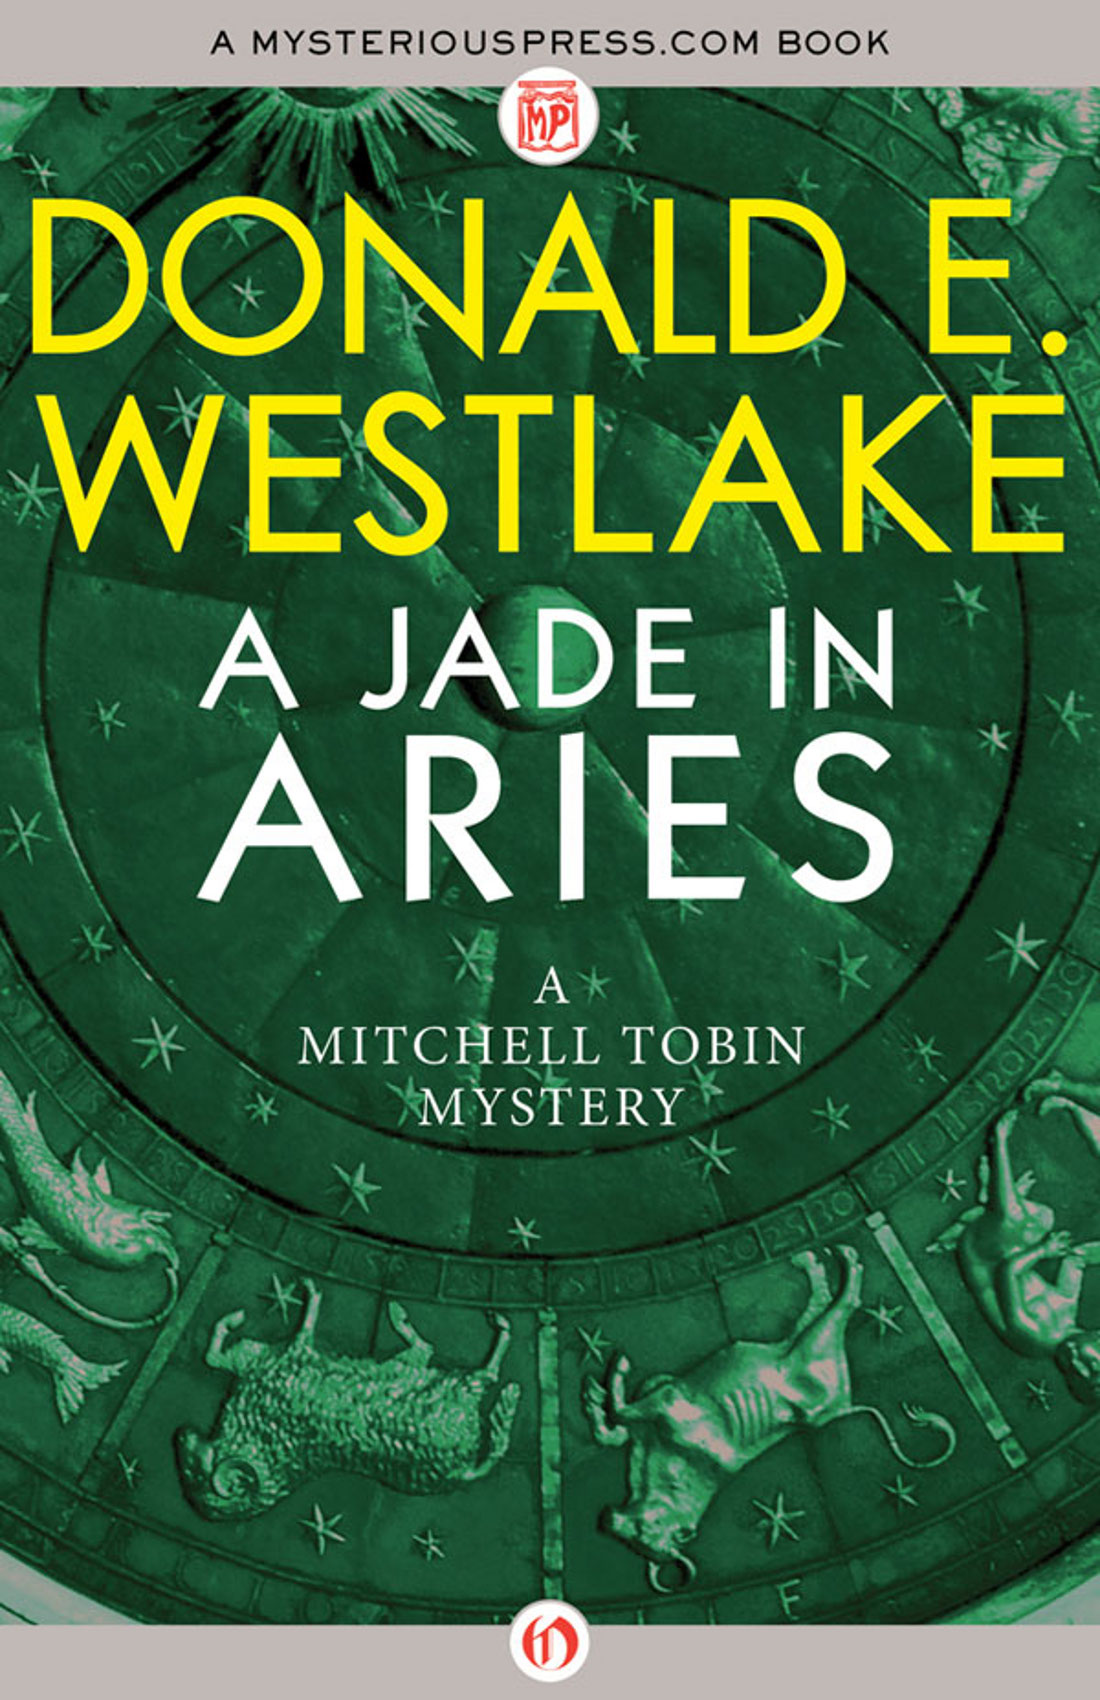 Jade in Aries by Donald E. Westlake